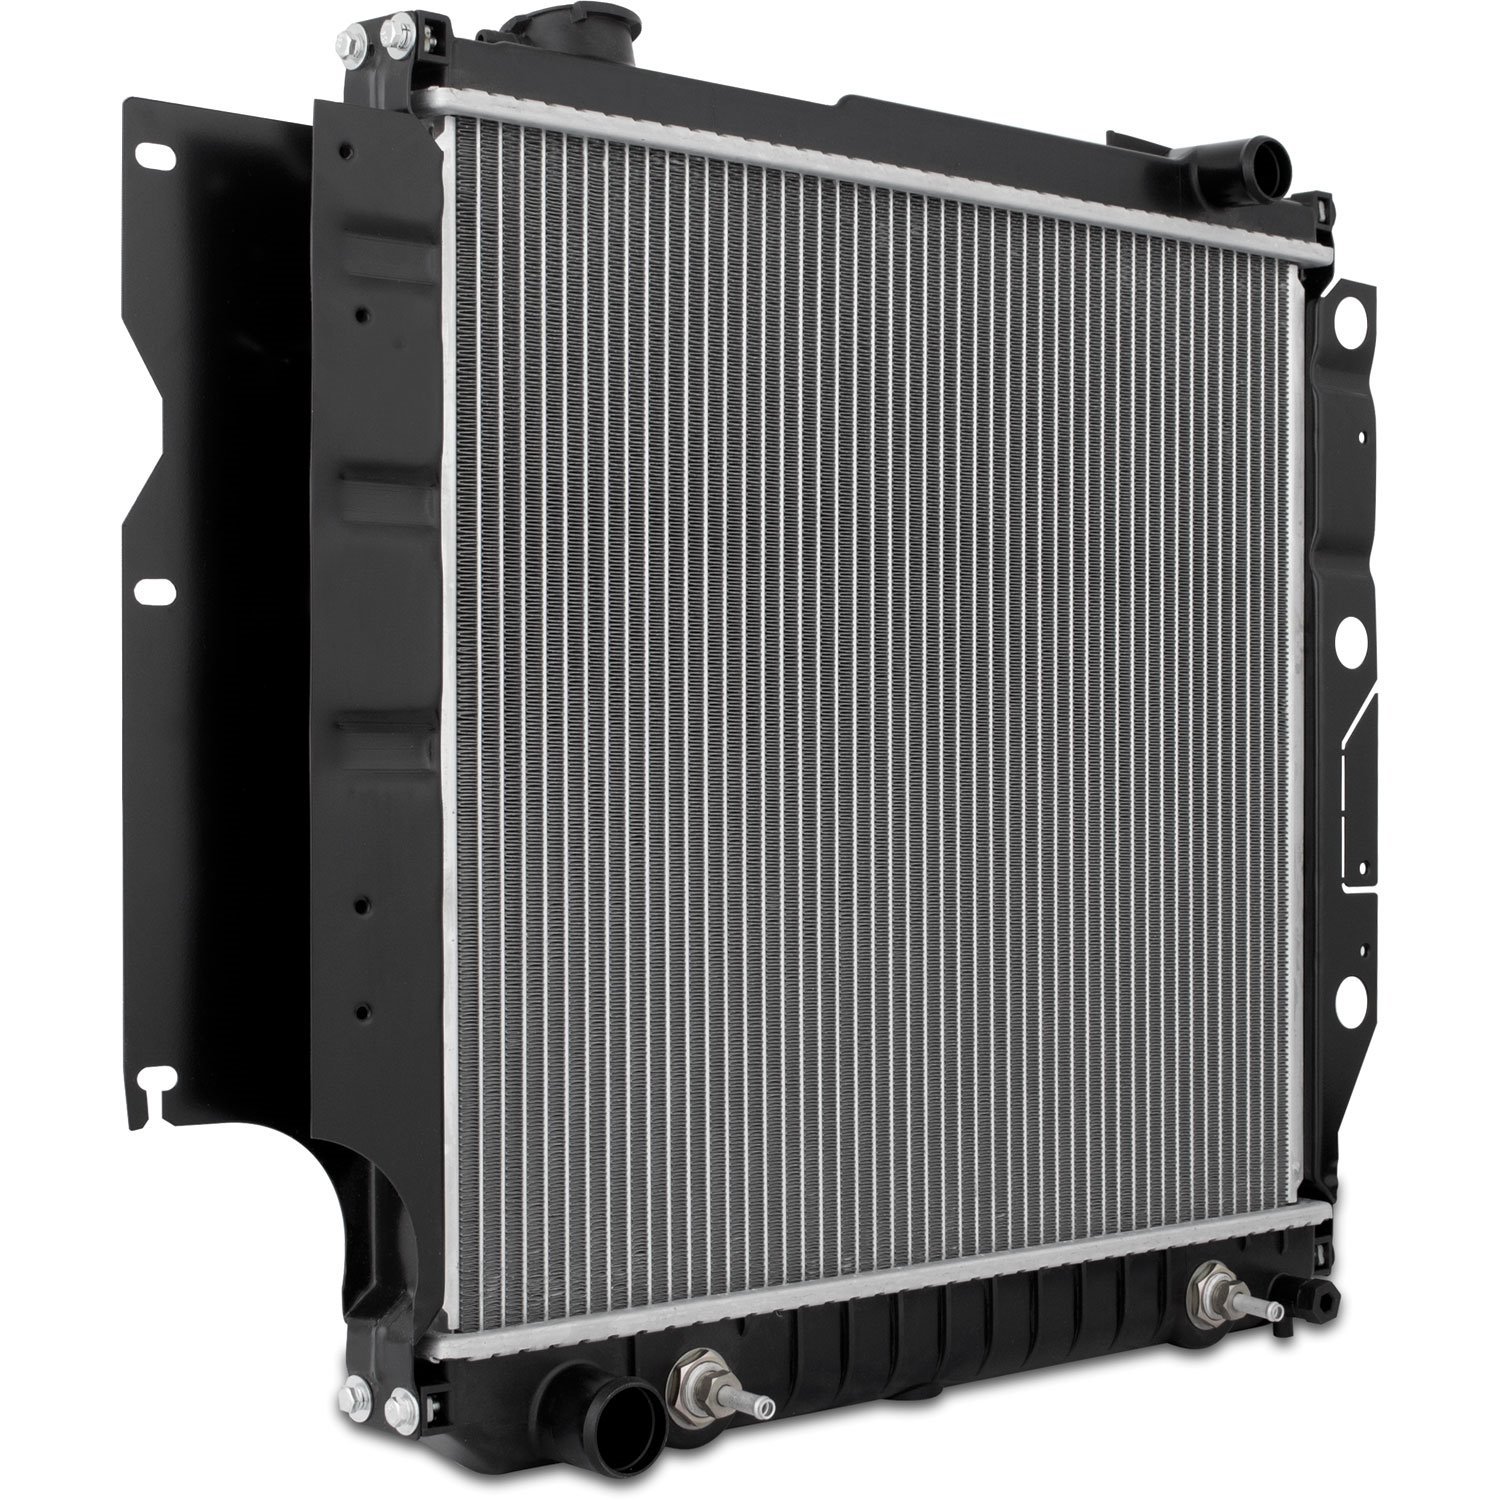 Jeep Wrangler YJ L4 and L6 OEM Replacement Radiator - MFG Part No. R1015